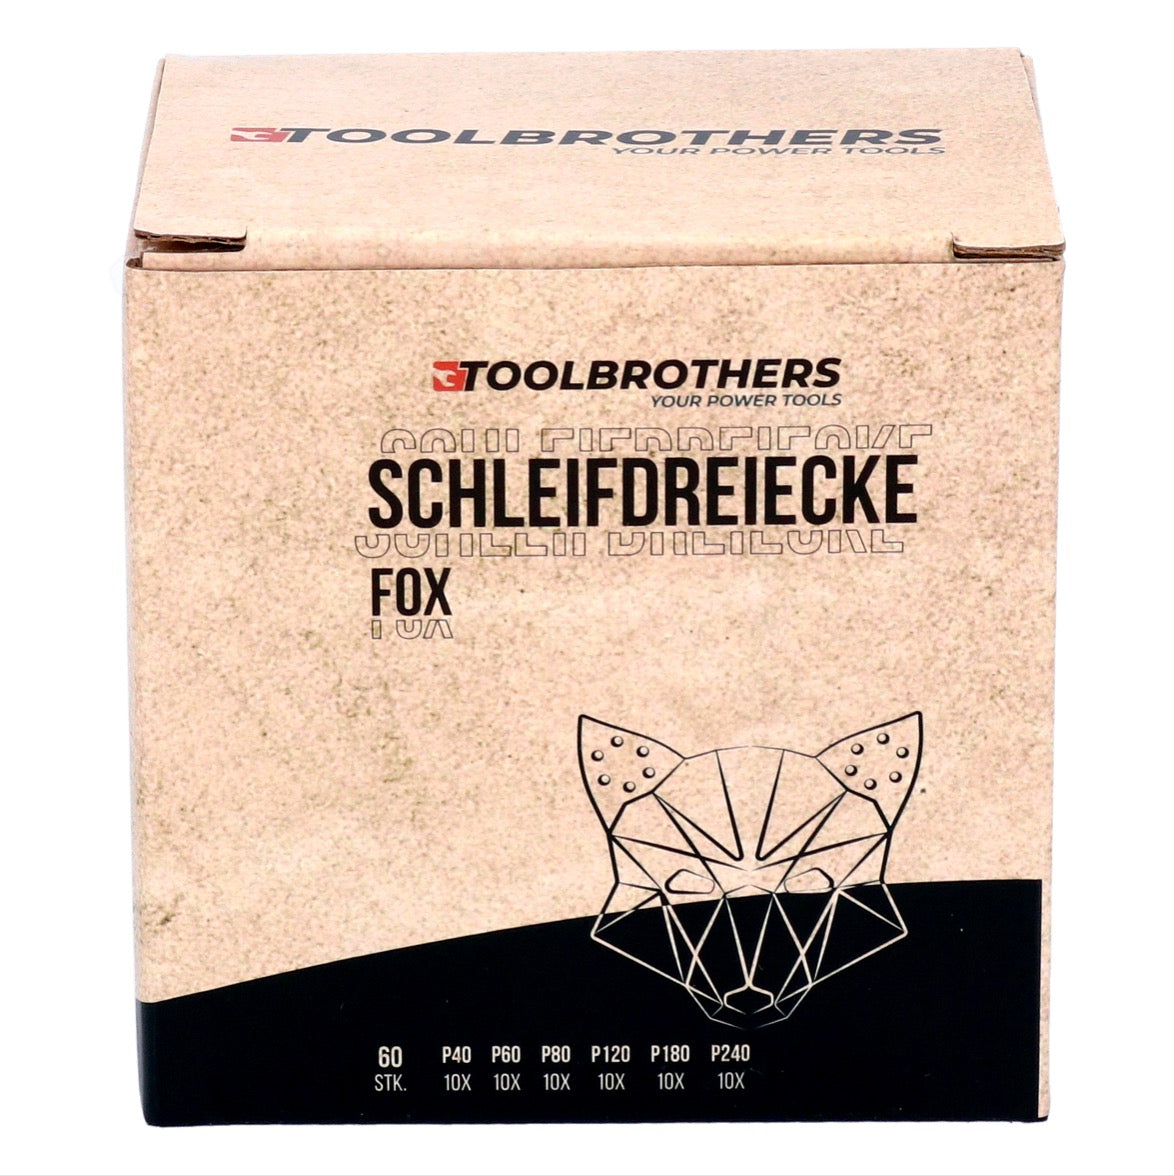 Toolbrothers FOX Schleifset Delta Schleifdreiecke 93 x 93 x 93 mm Klett 6 Loch je 10x P40 / P60 / P80 / P120 / P180 / P240 für Hartholz, Weichholz, Lack, Stein, Stahl, Aluminium, Furnier - Toolbrothers